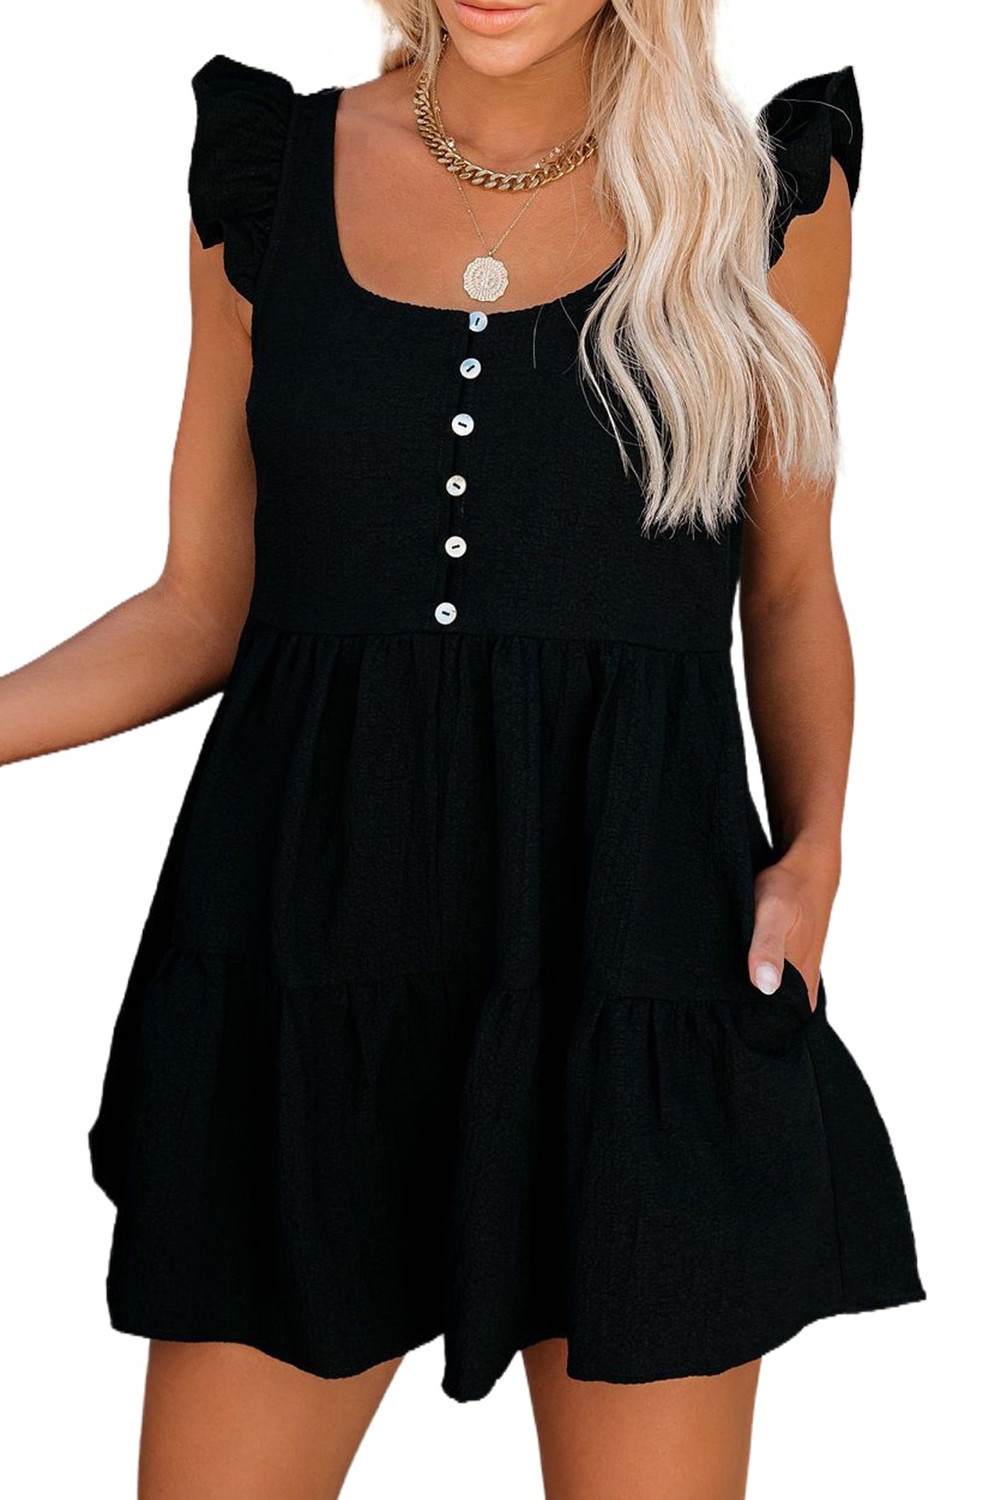 Wholesale Other Category, Cheap Black Ruffled Babydoll Romper with ...